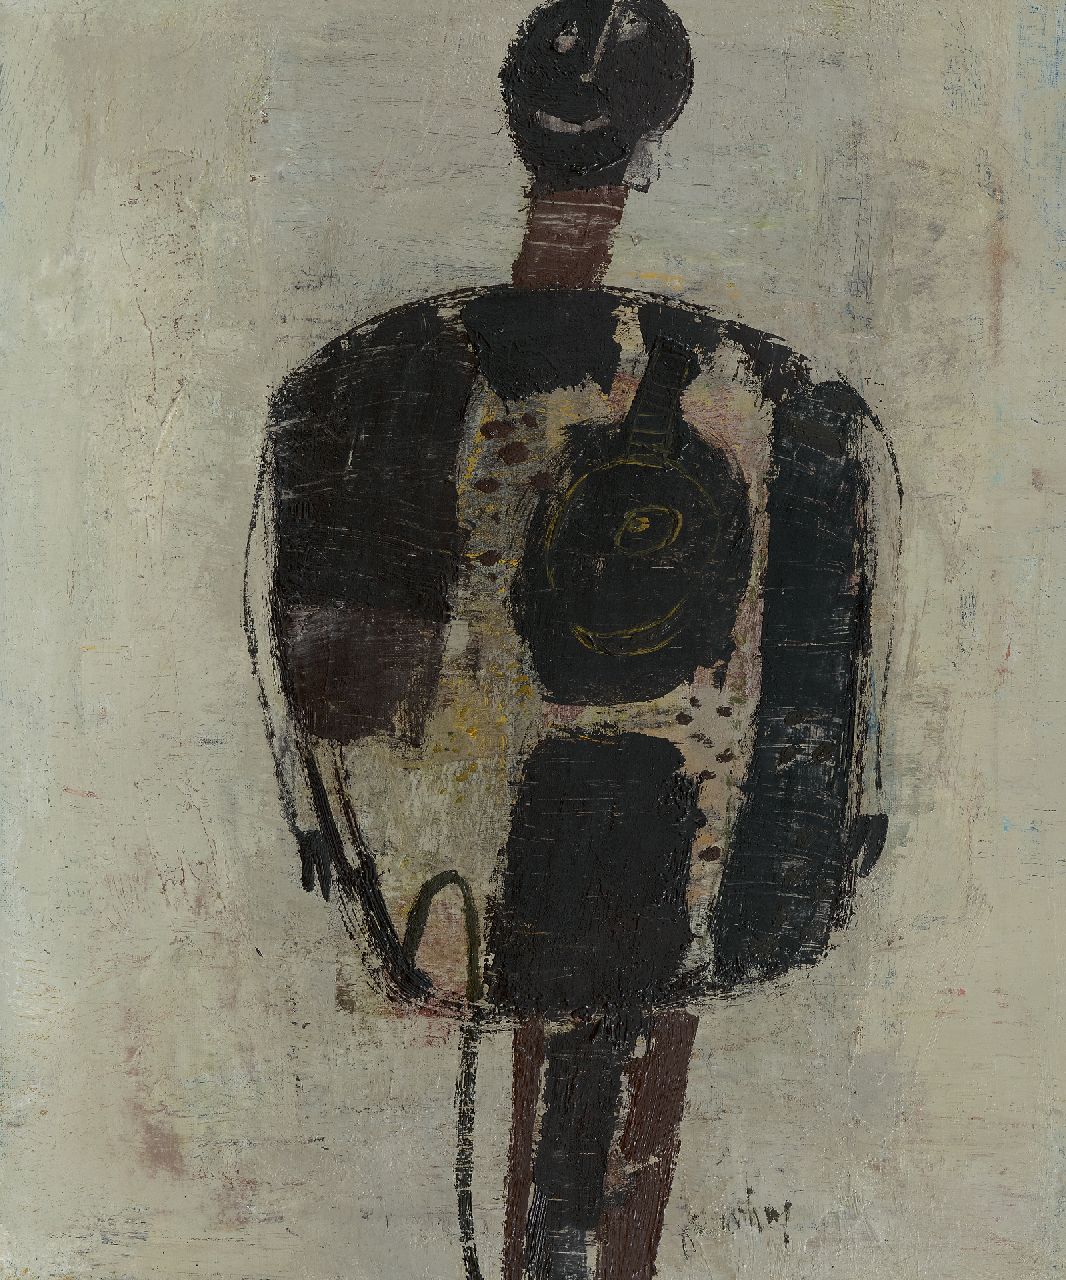 Heel J.J. van | Johannes Jacobus 'Jan' van Heel | Paintings offered for sale | Black doll, oil on canvas 60.4 x 49.9 cm, signed l.c. and on the reverse and dated on the reverse '64